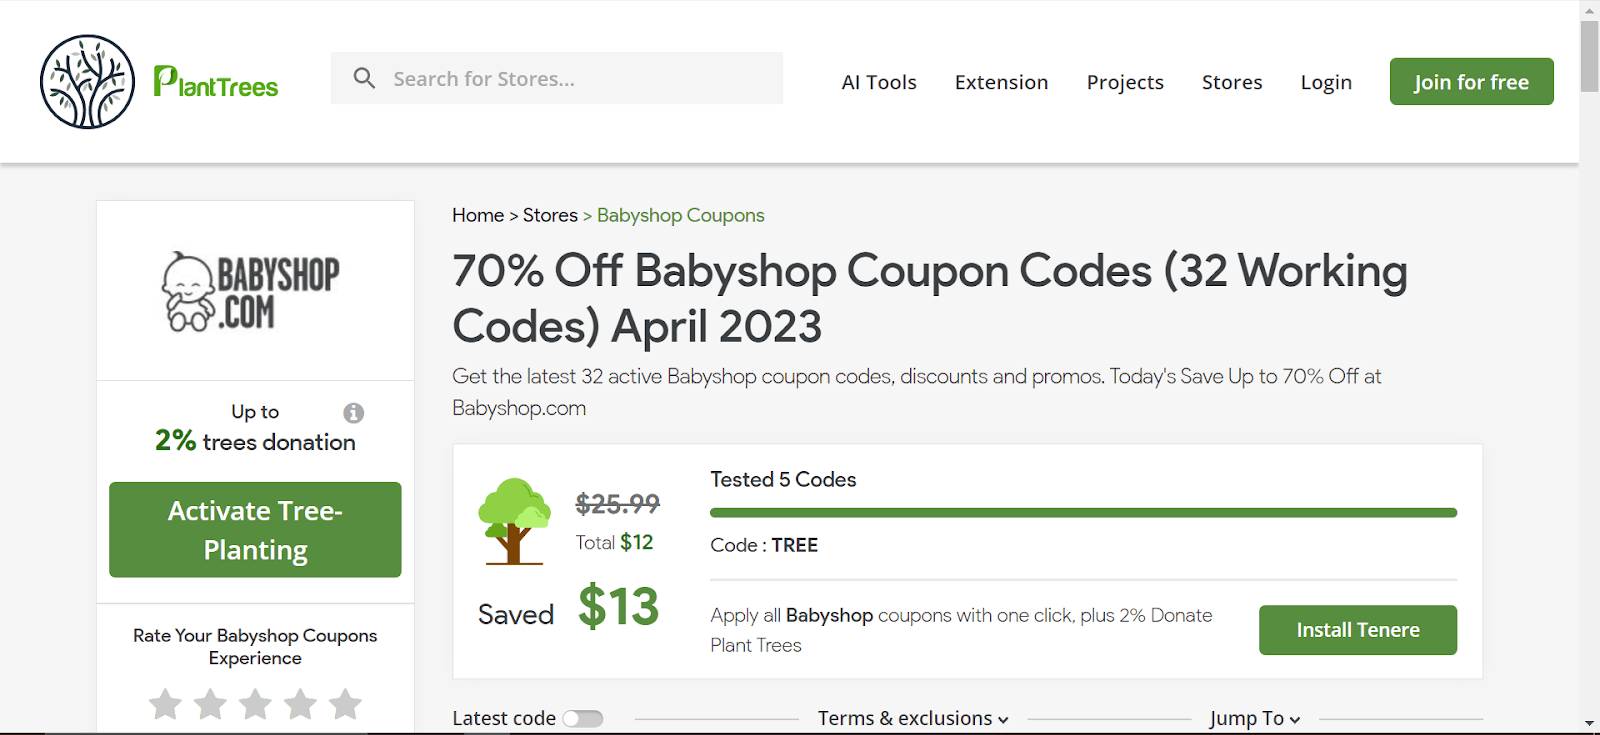 How To Use Babyshop Discount Code 3